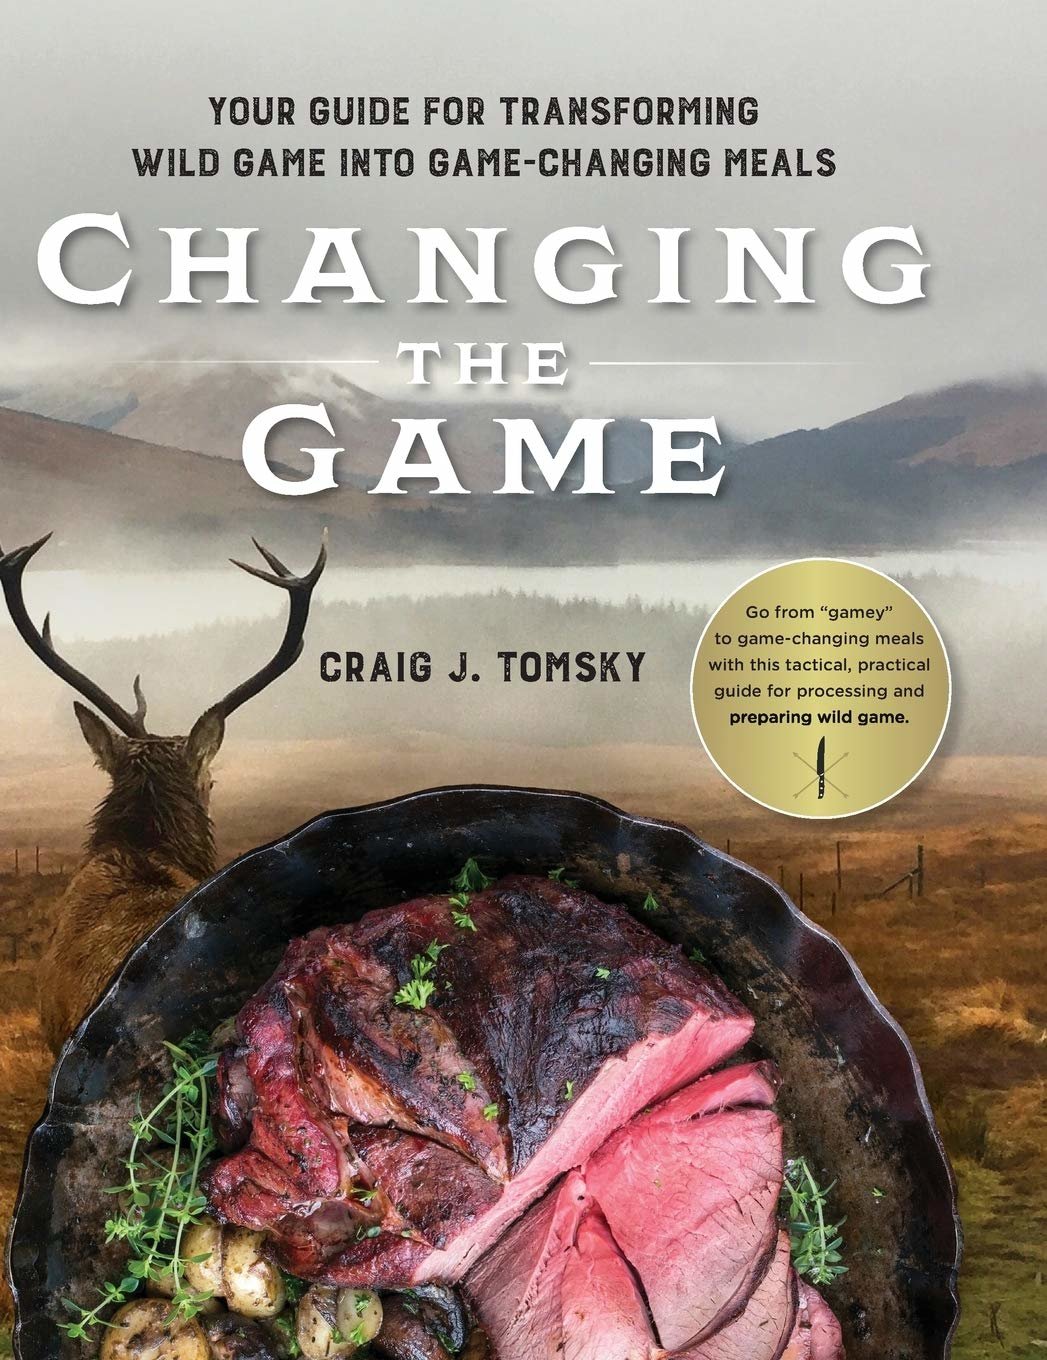 “Changing the Game: Your Guide for Transforming Wild Game into Game-Changing Meals” book cover